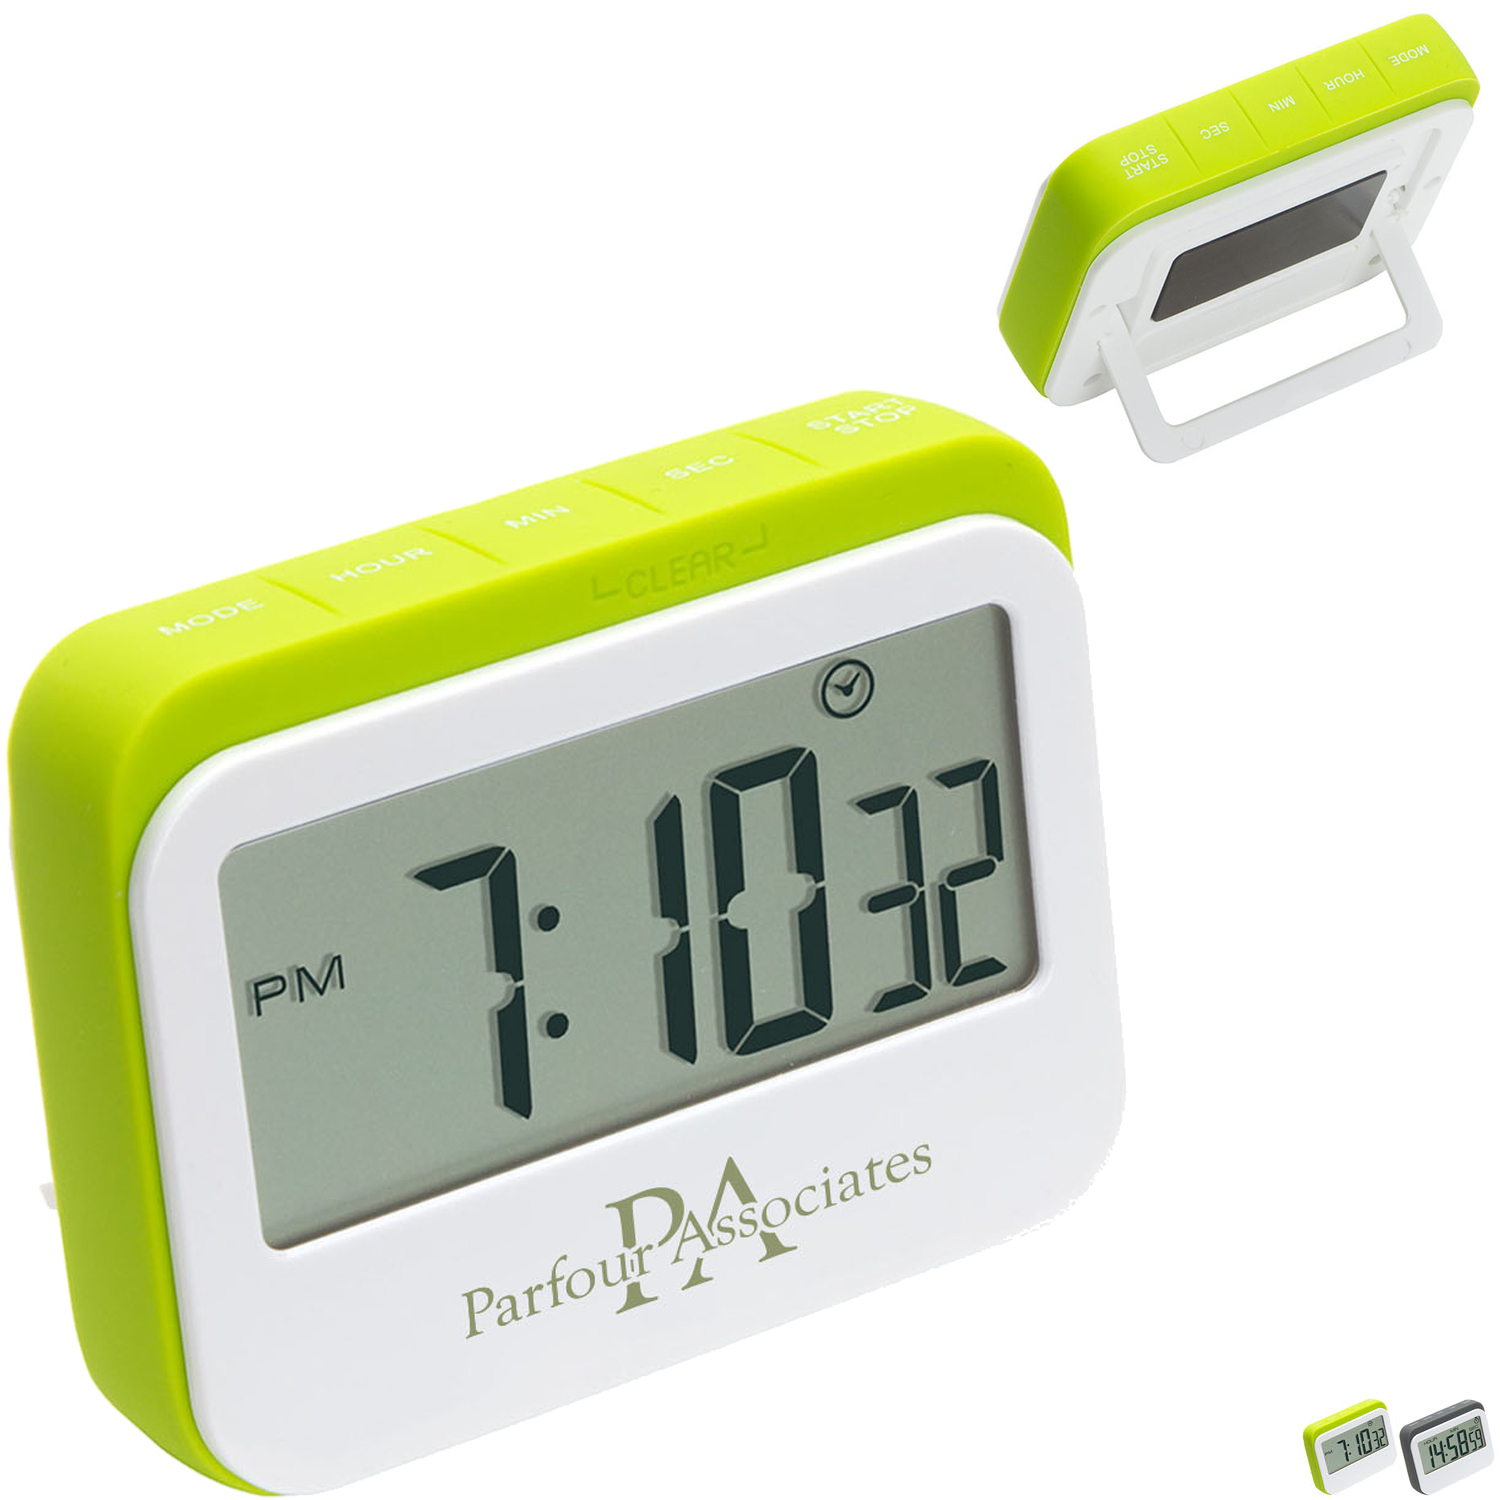 Print your Custom Kitchen timers in a few clicks